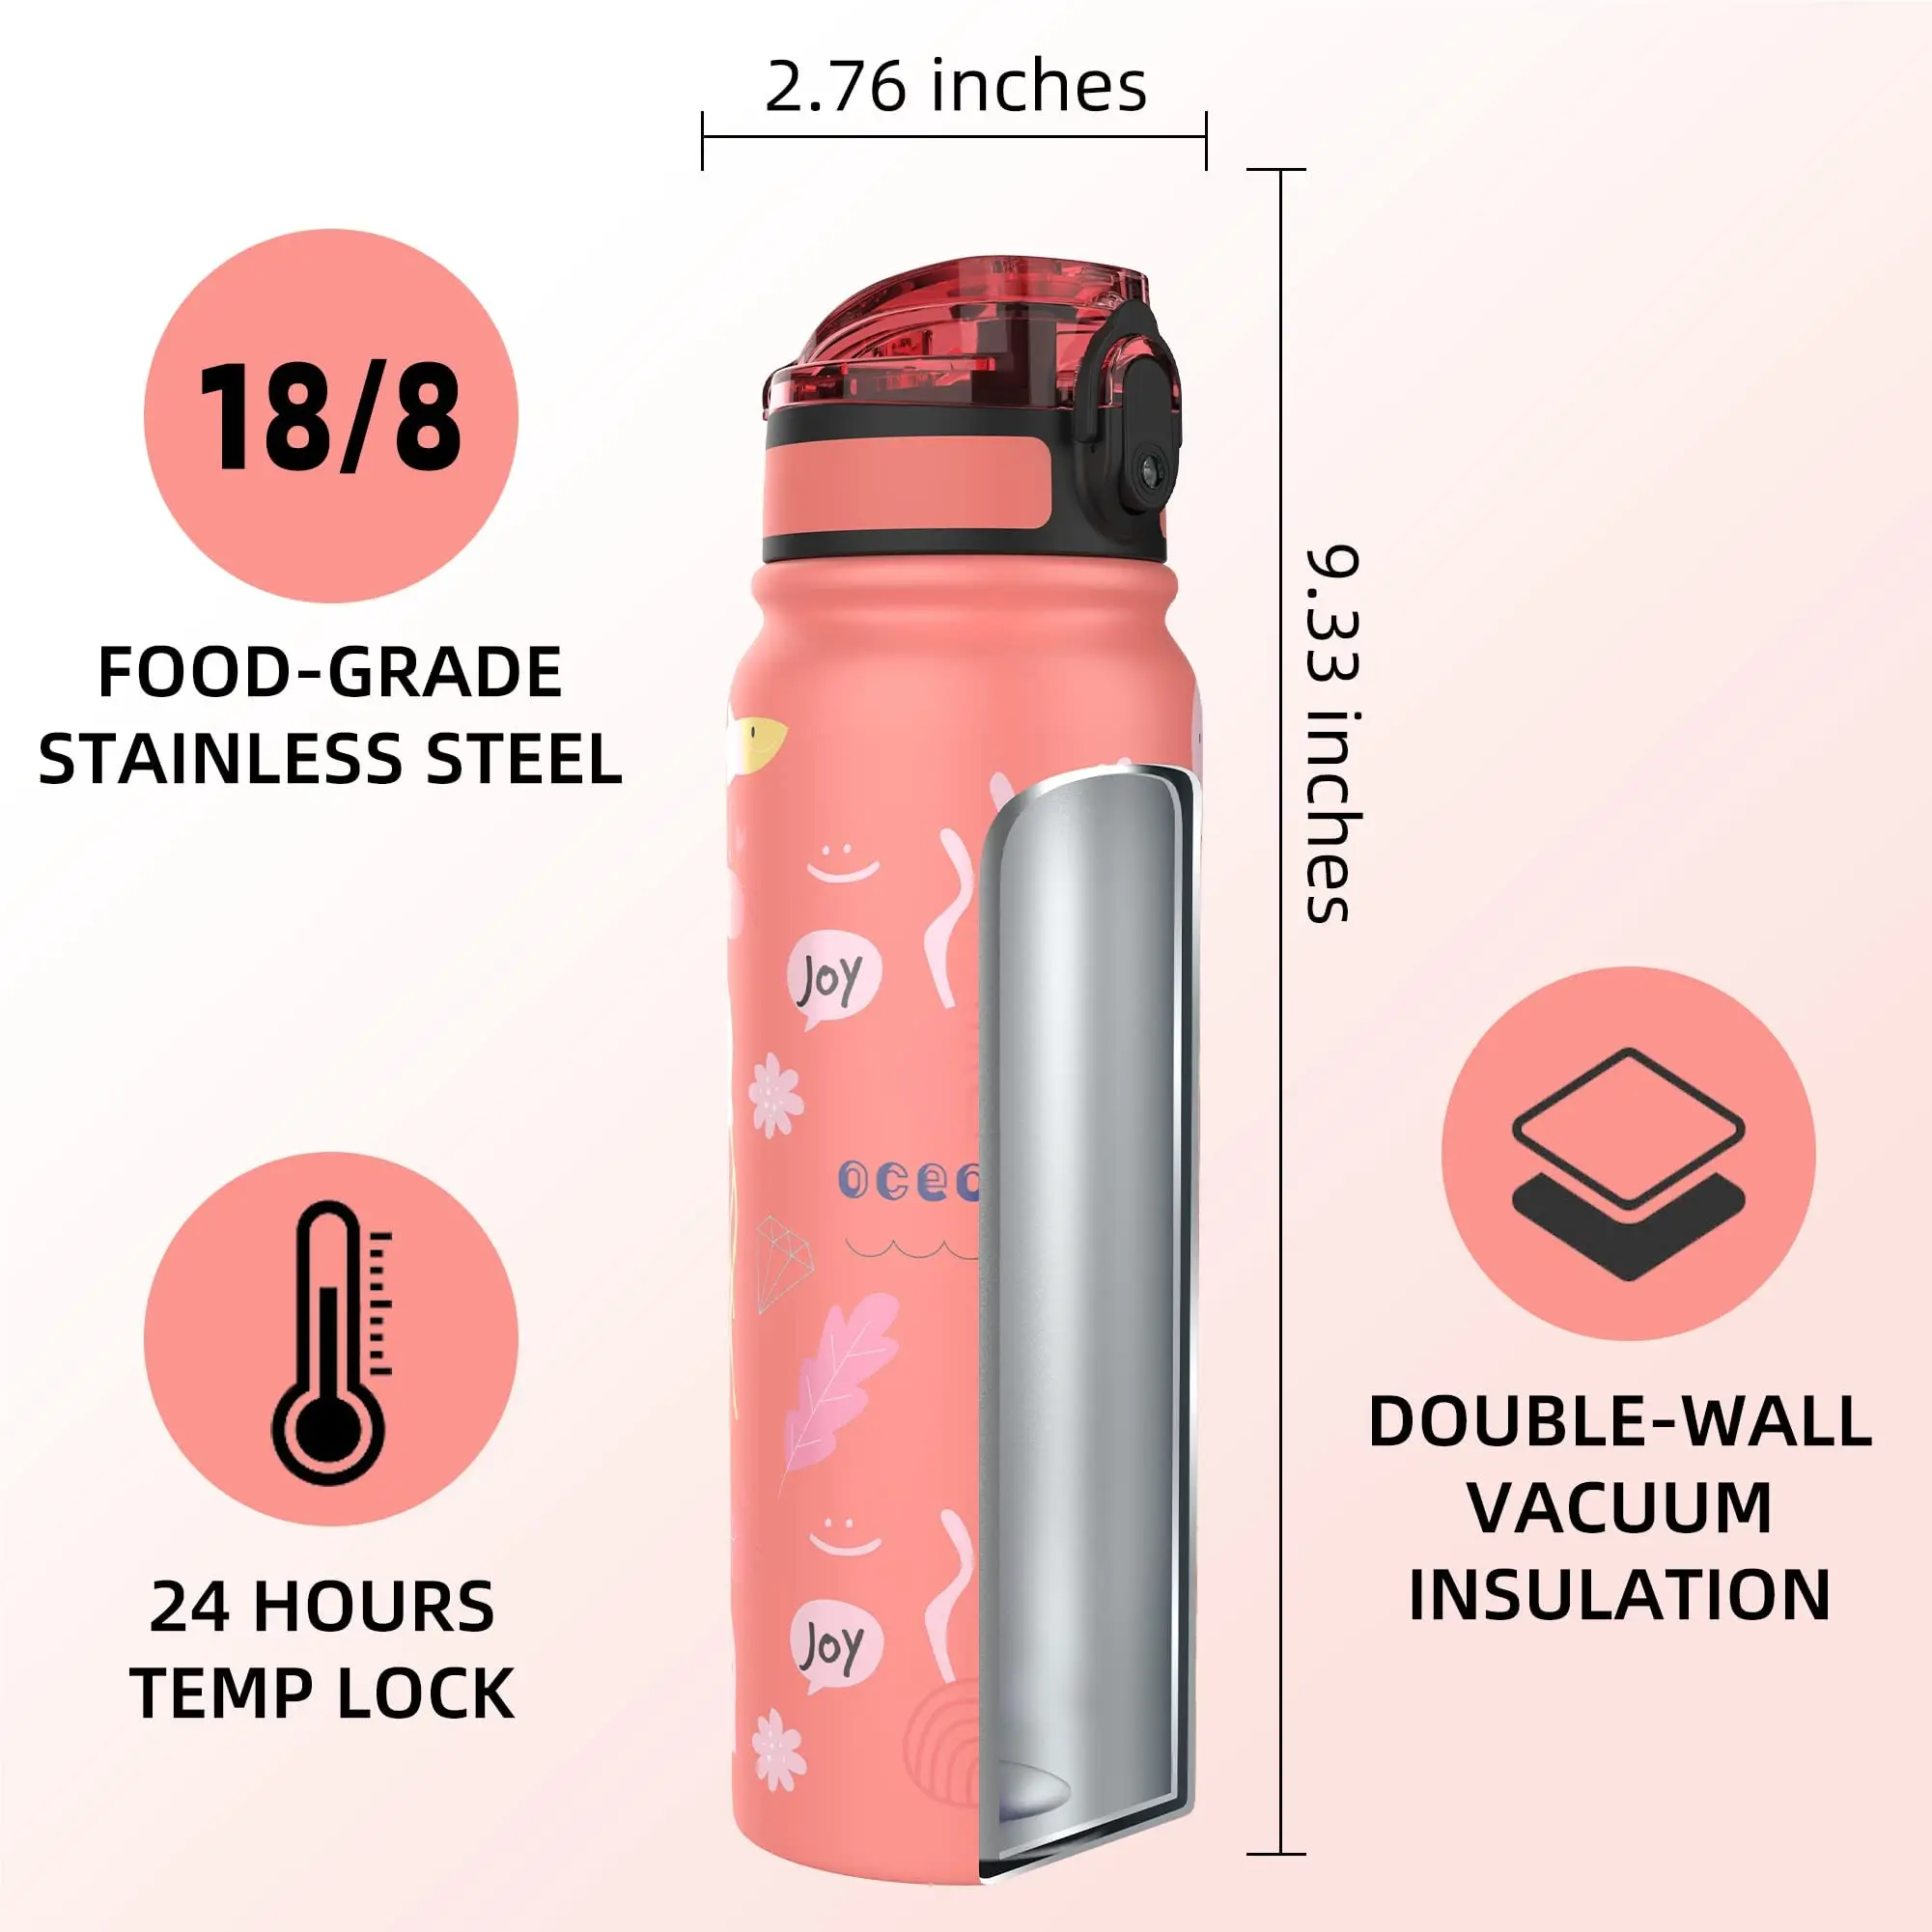 Stainless Steel Bottle Double Wall Insulated Vacuum Flask Water Bottle Powder Coated Metal for Sports Vacuum Flasks & Thermoses